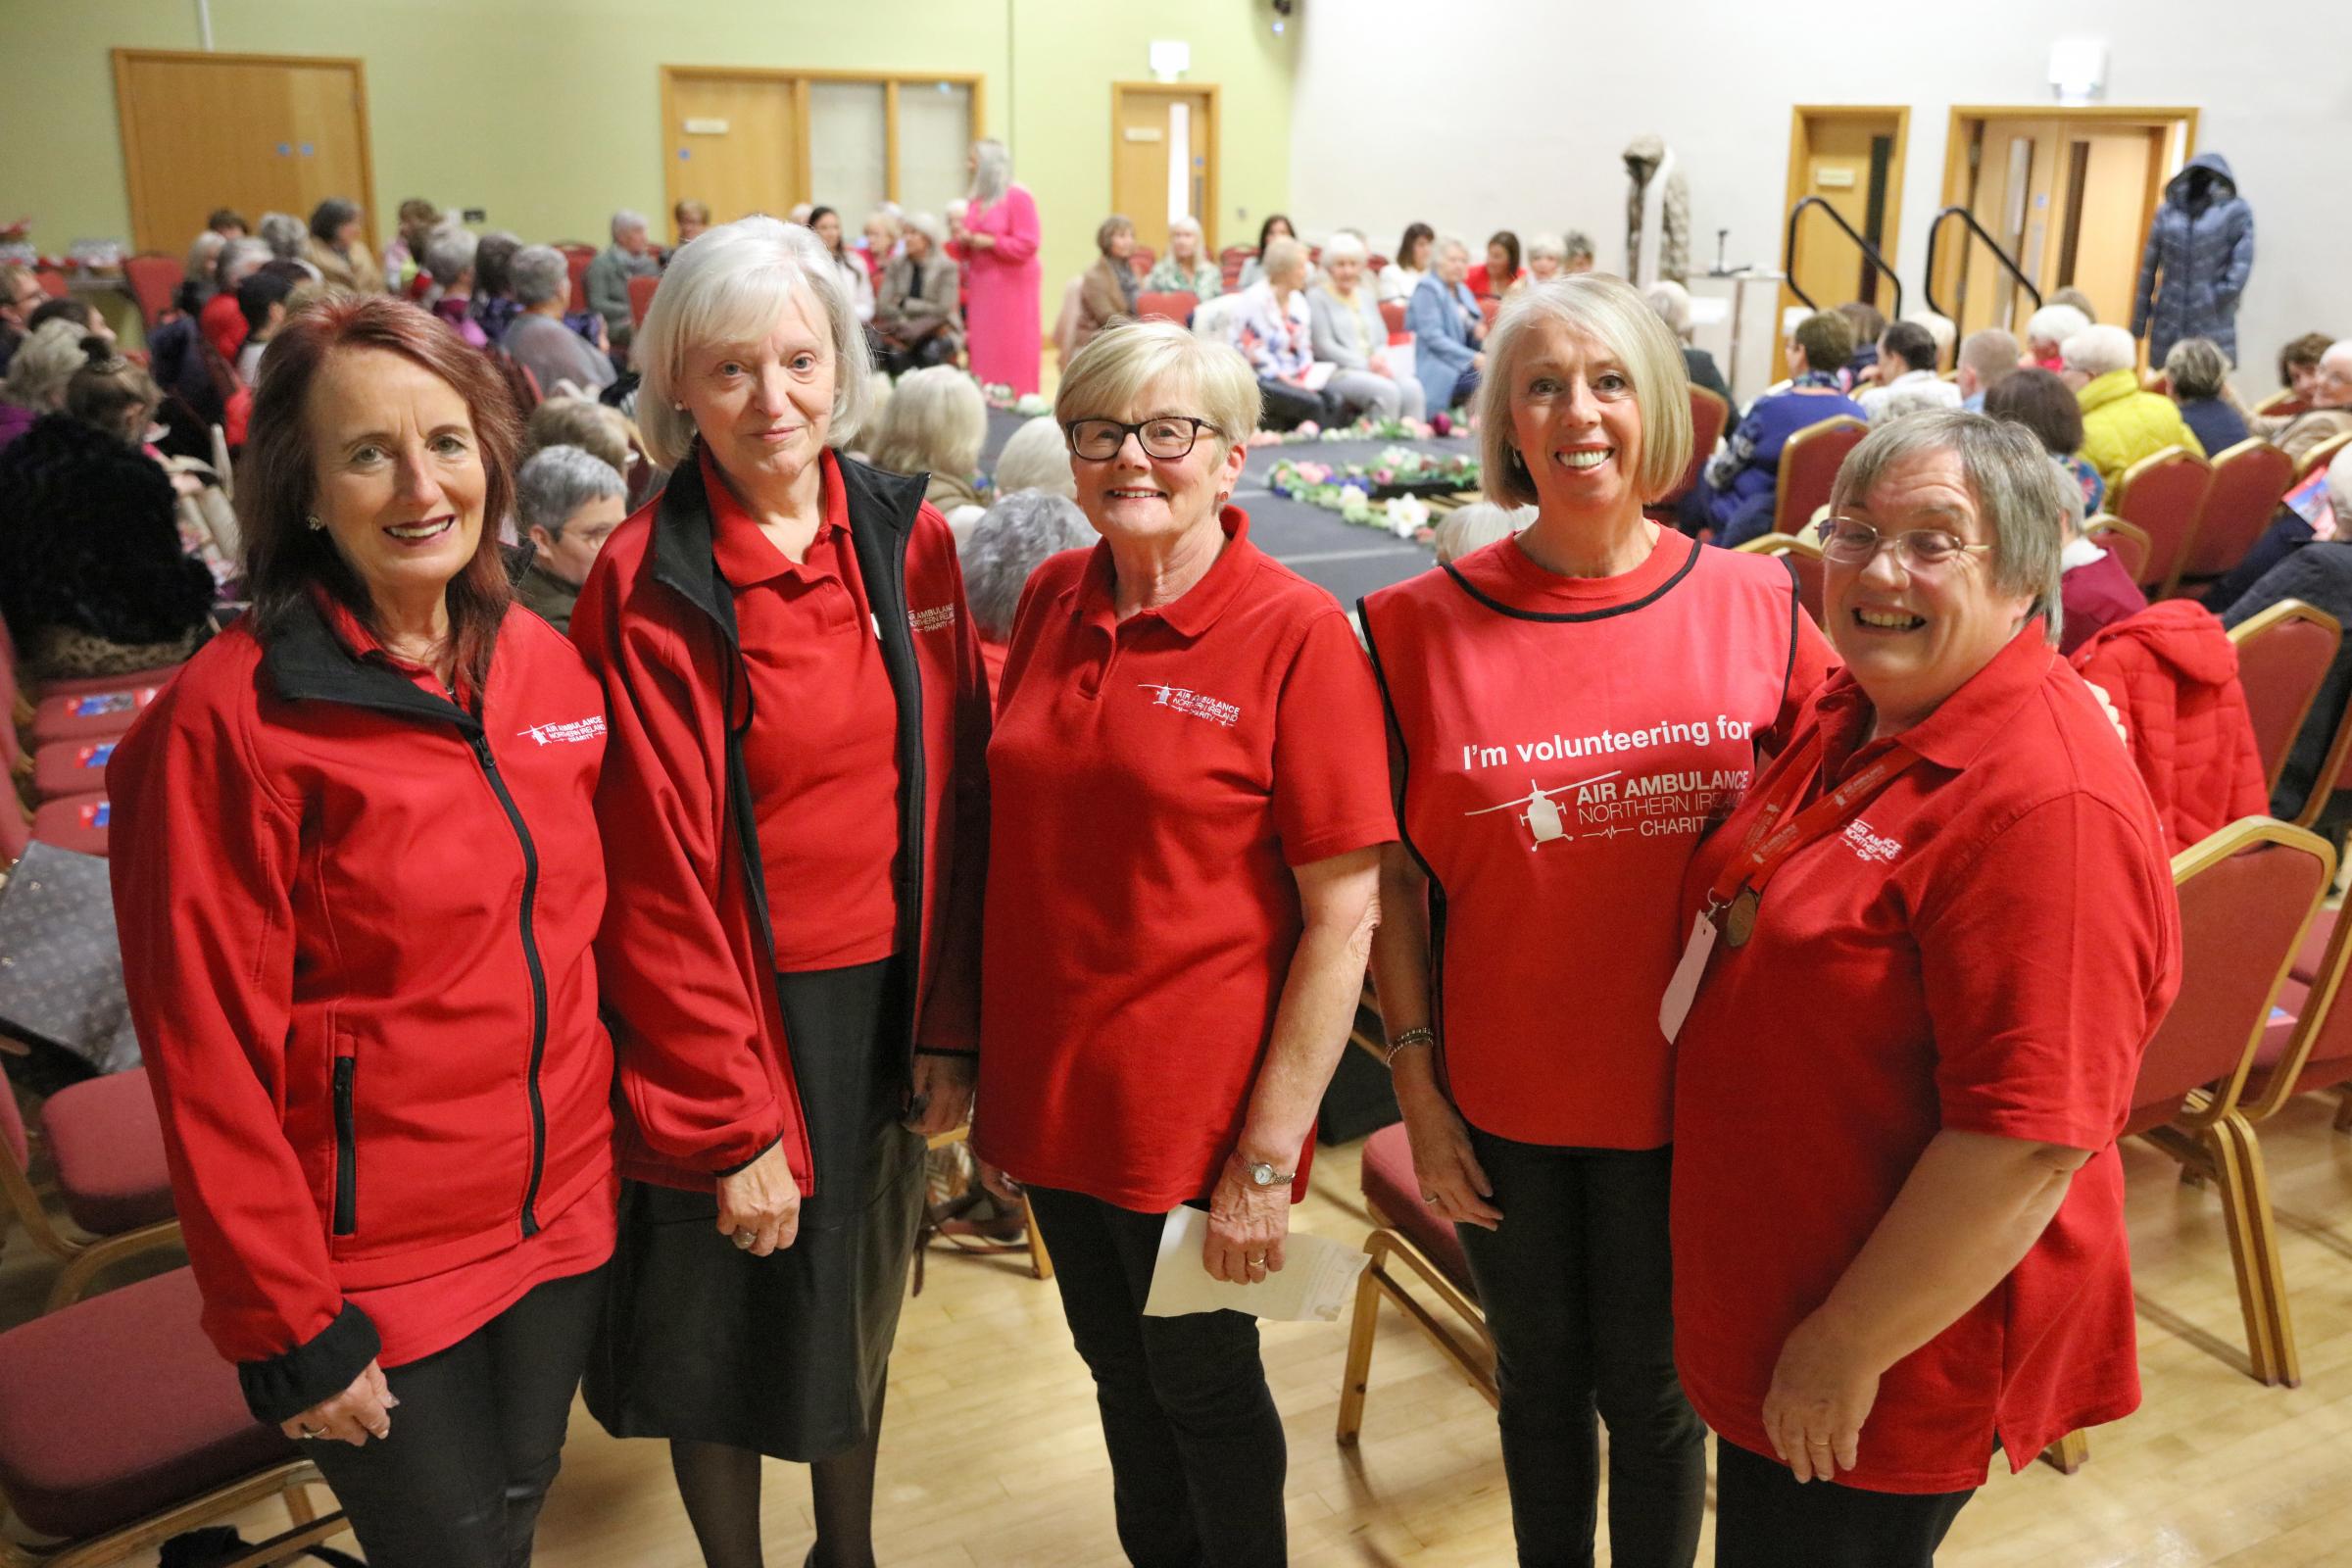 Local Air Ambulance volunteers Hazel McClements, Myrtle South, Myrtle Irvine, Karen Clyde and Avril Stubbs just getting ready for the fashion show to start.